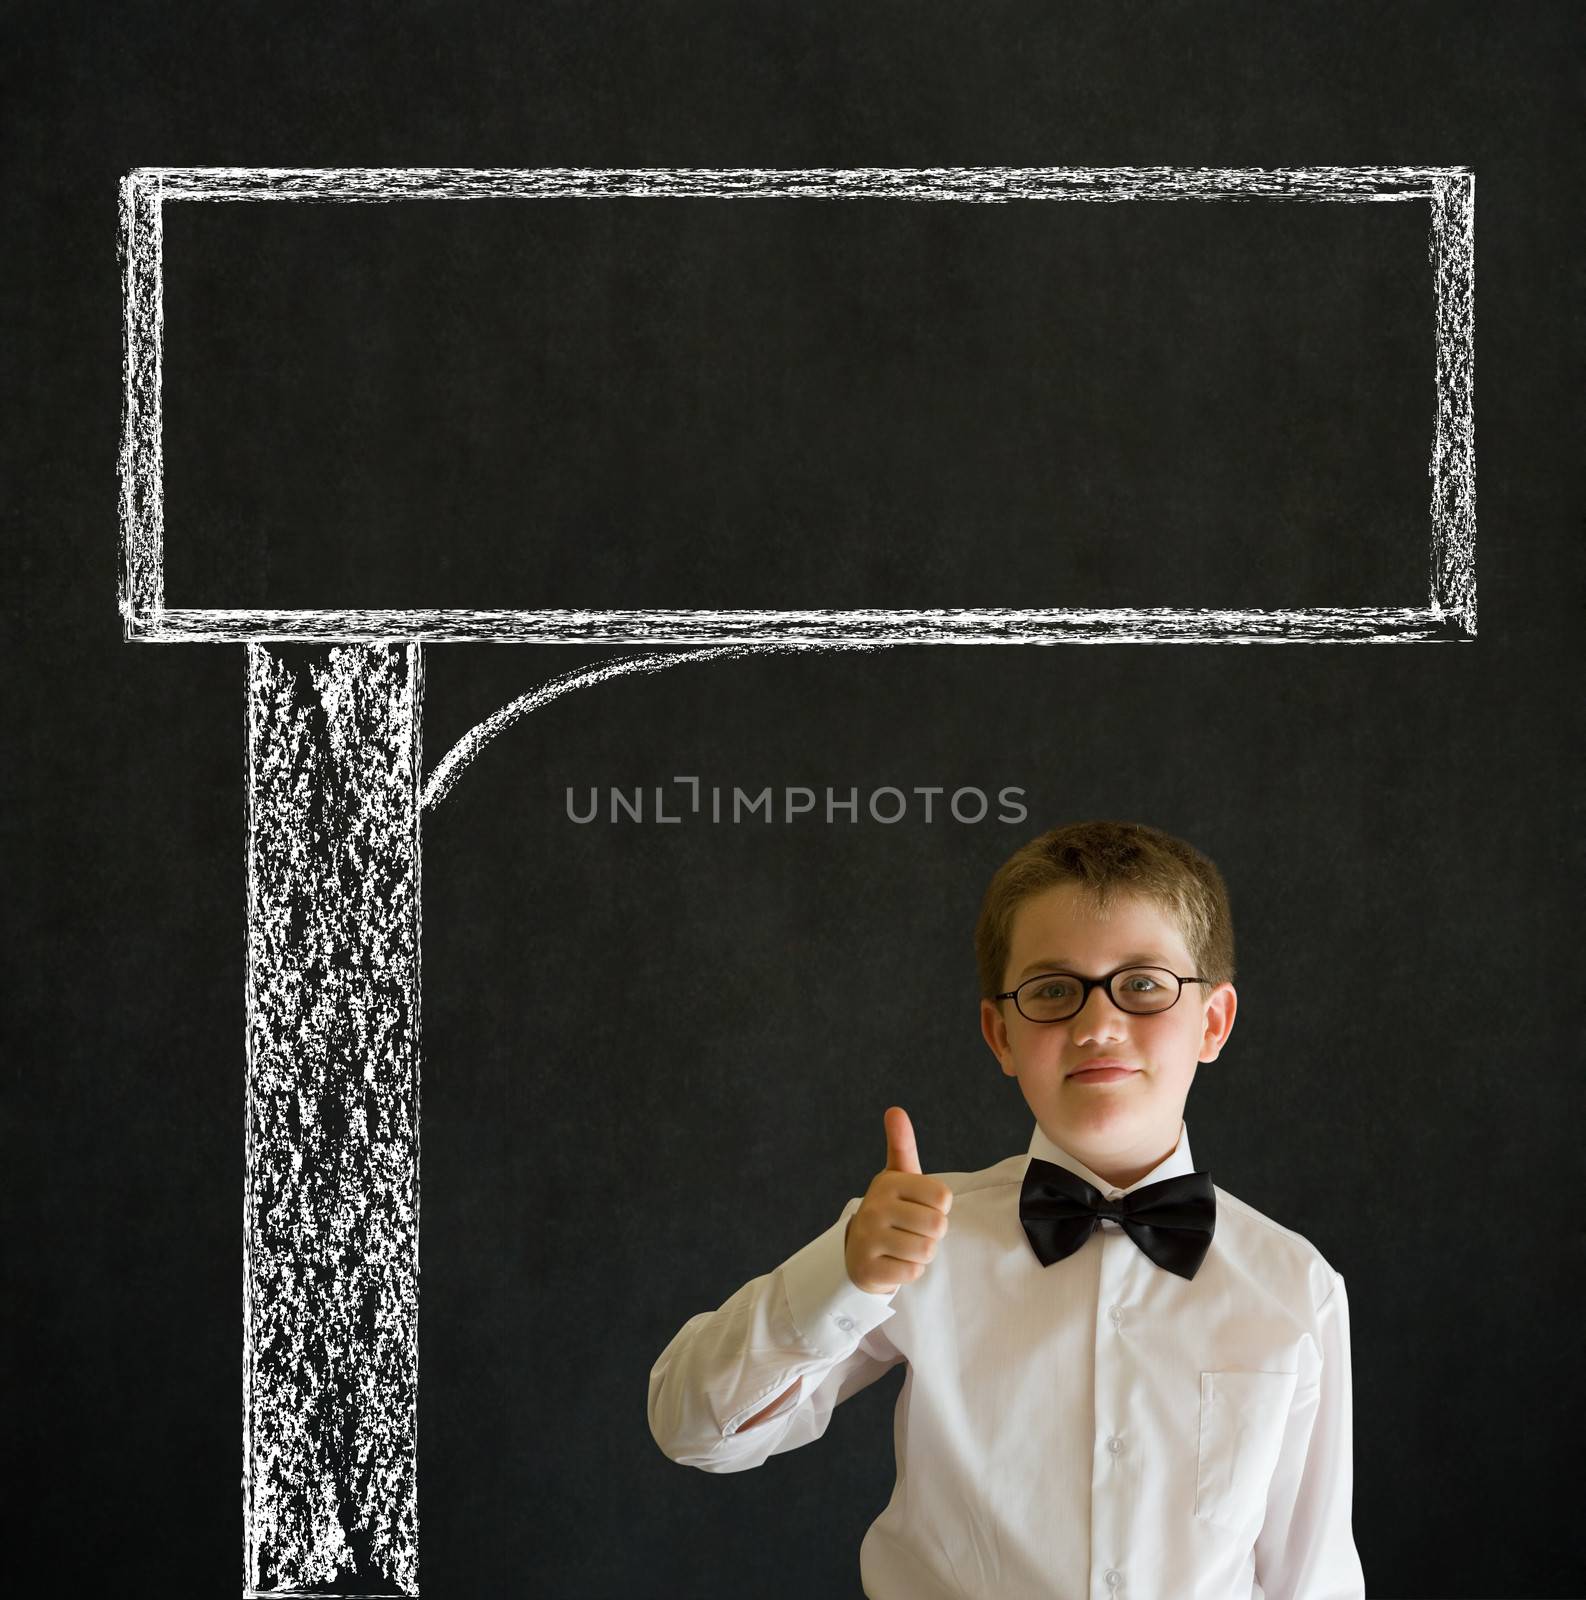 Thumbs up boy dressed up as business man with chalk road advertising sign on blackboard background